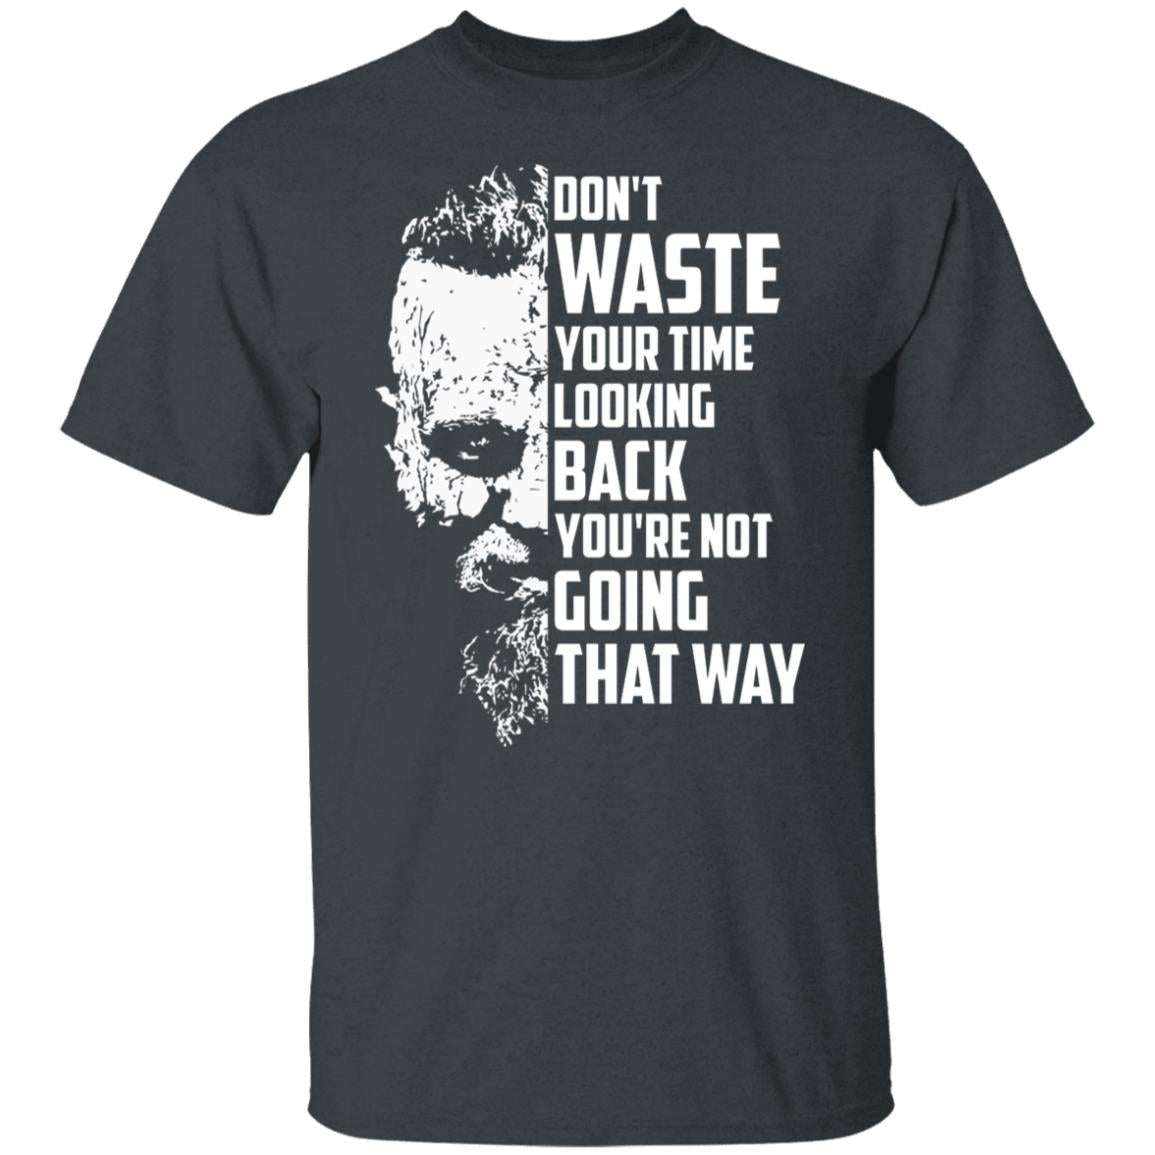 Dont Waste Your Time Looking Back Viking T-shirts, Viking Hoodies